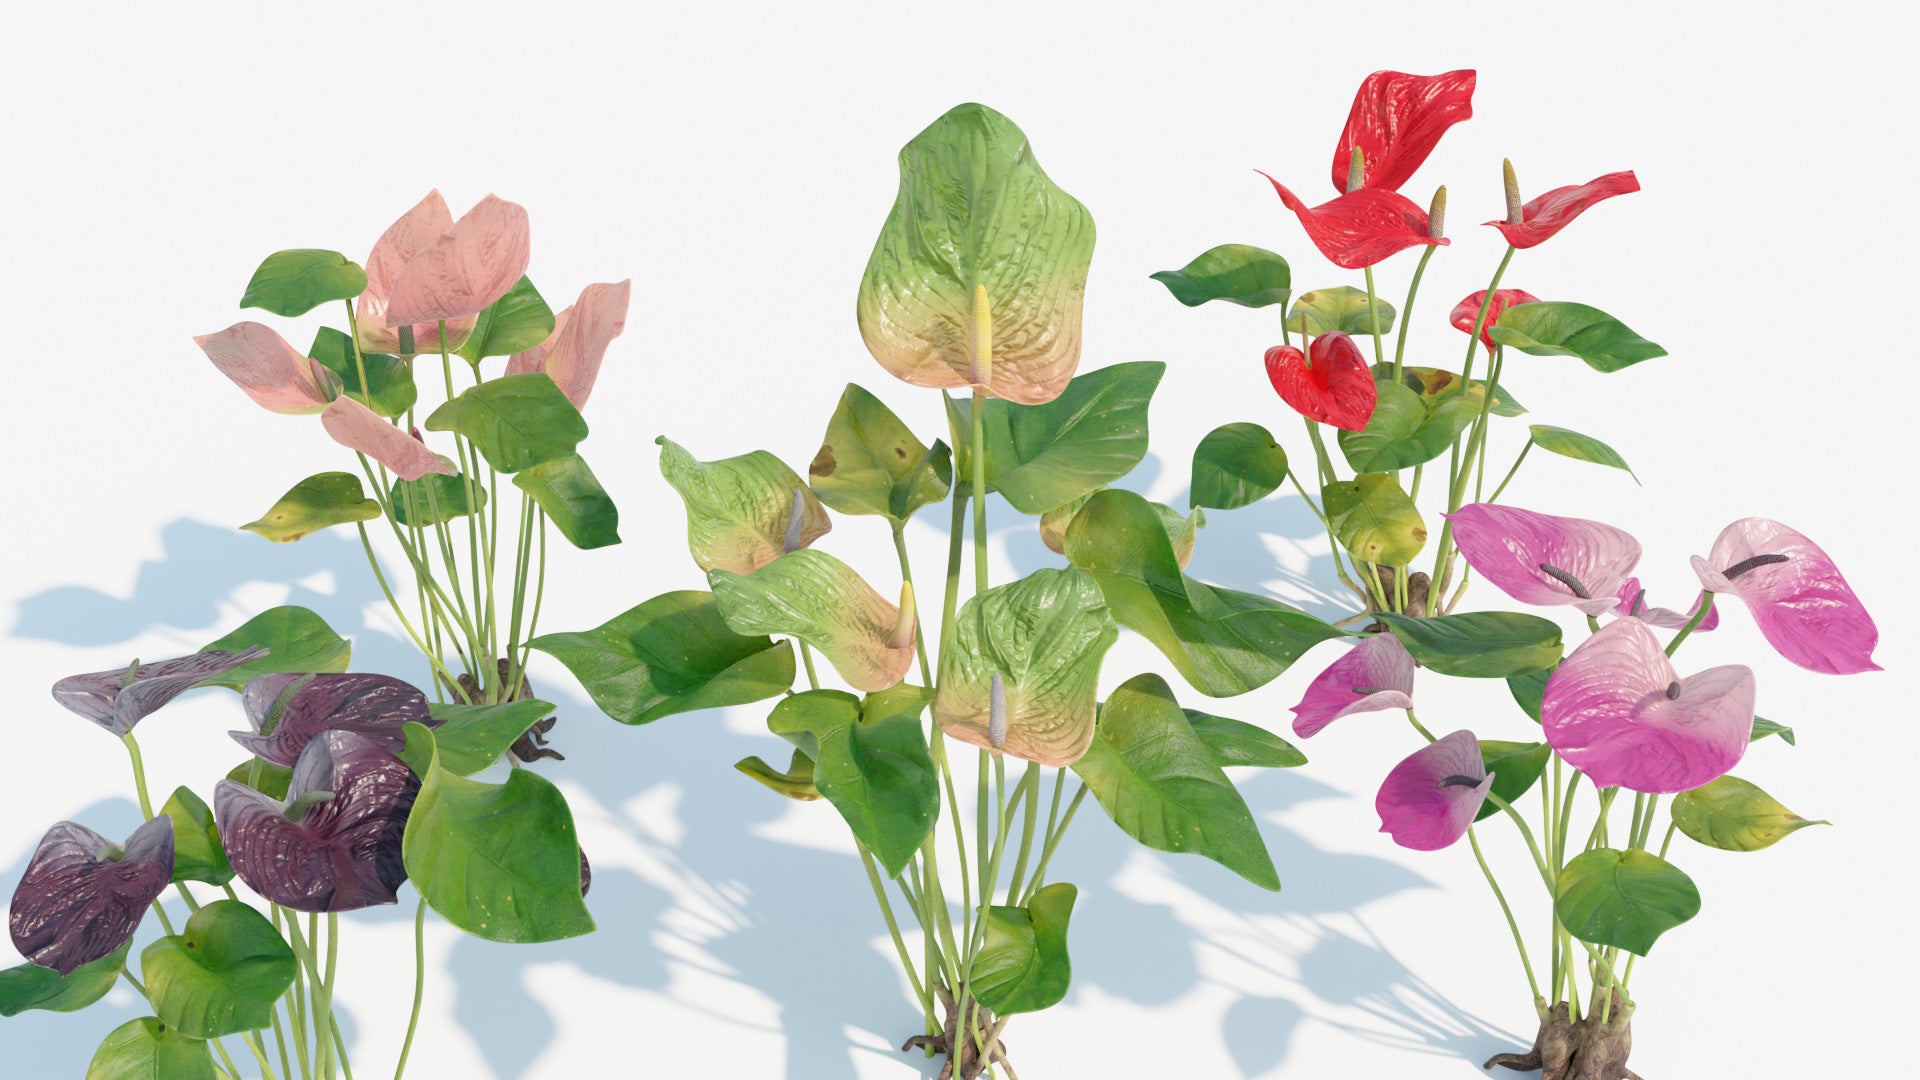 Anthurium flowers and plant colors lowpoly 3D model with PBR textures for Blender, OBJ, FBX and GLB